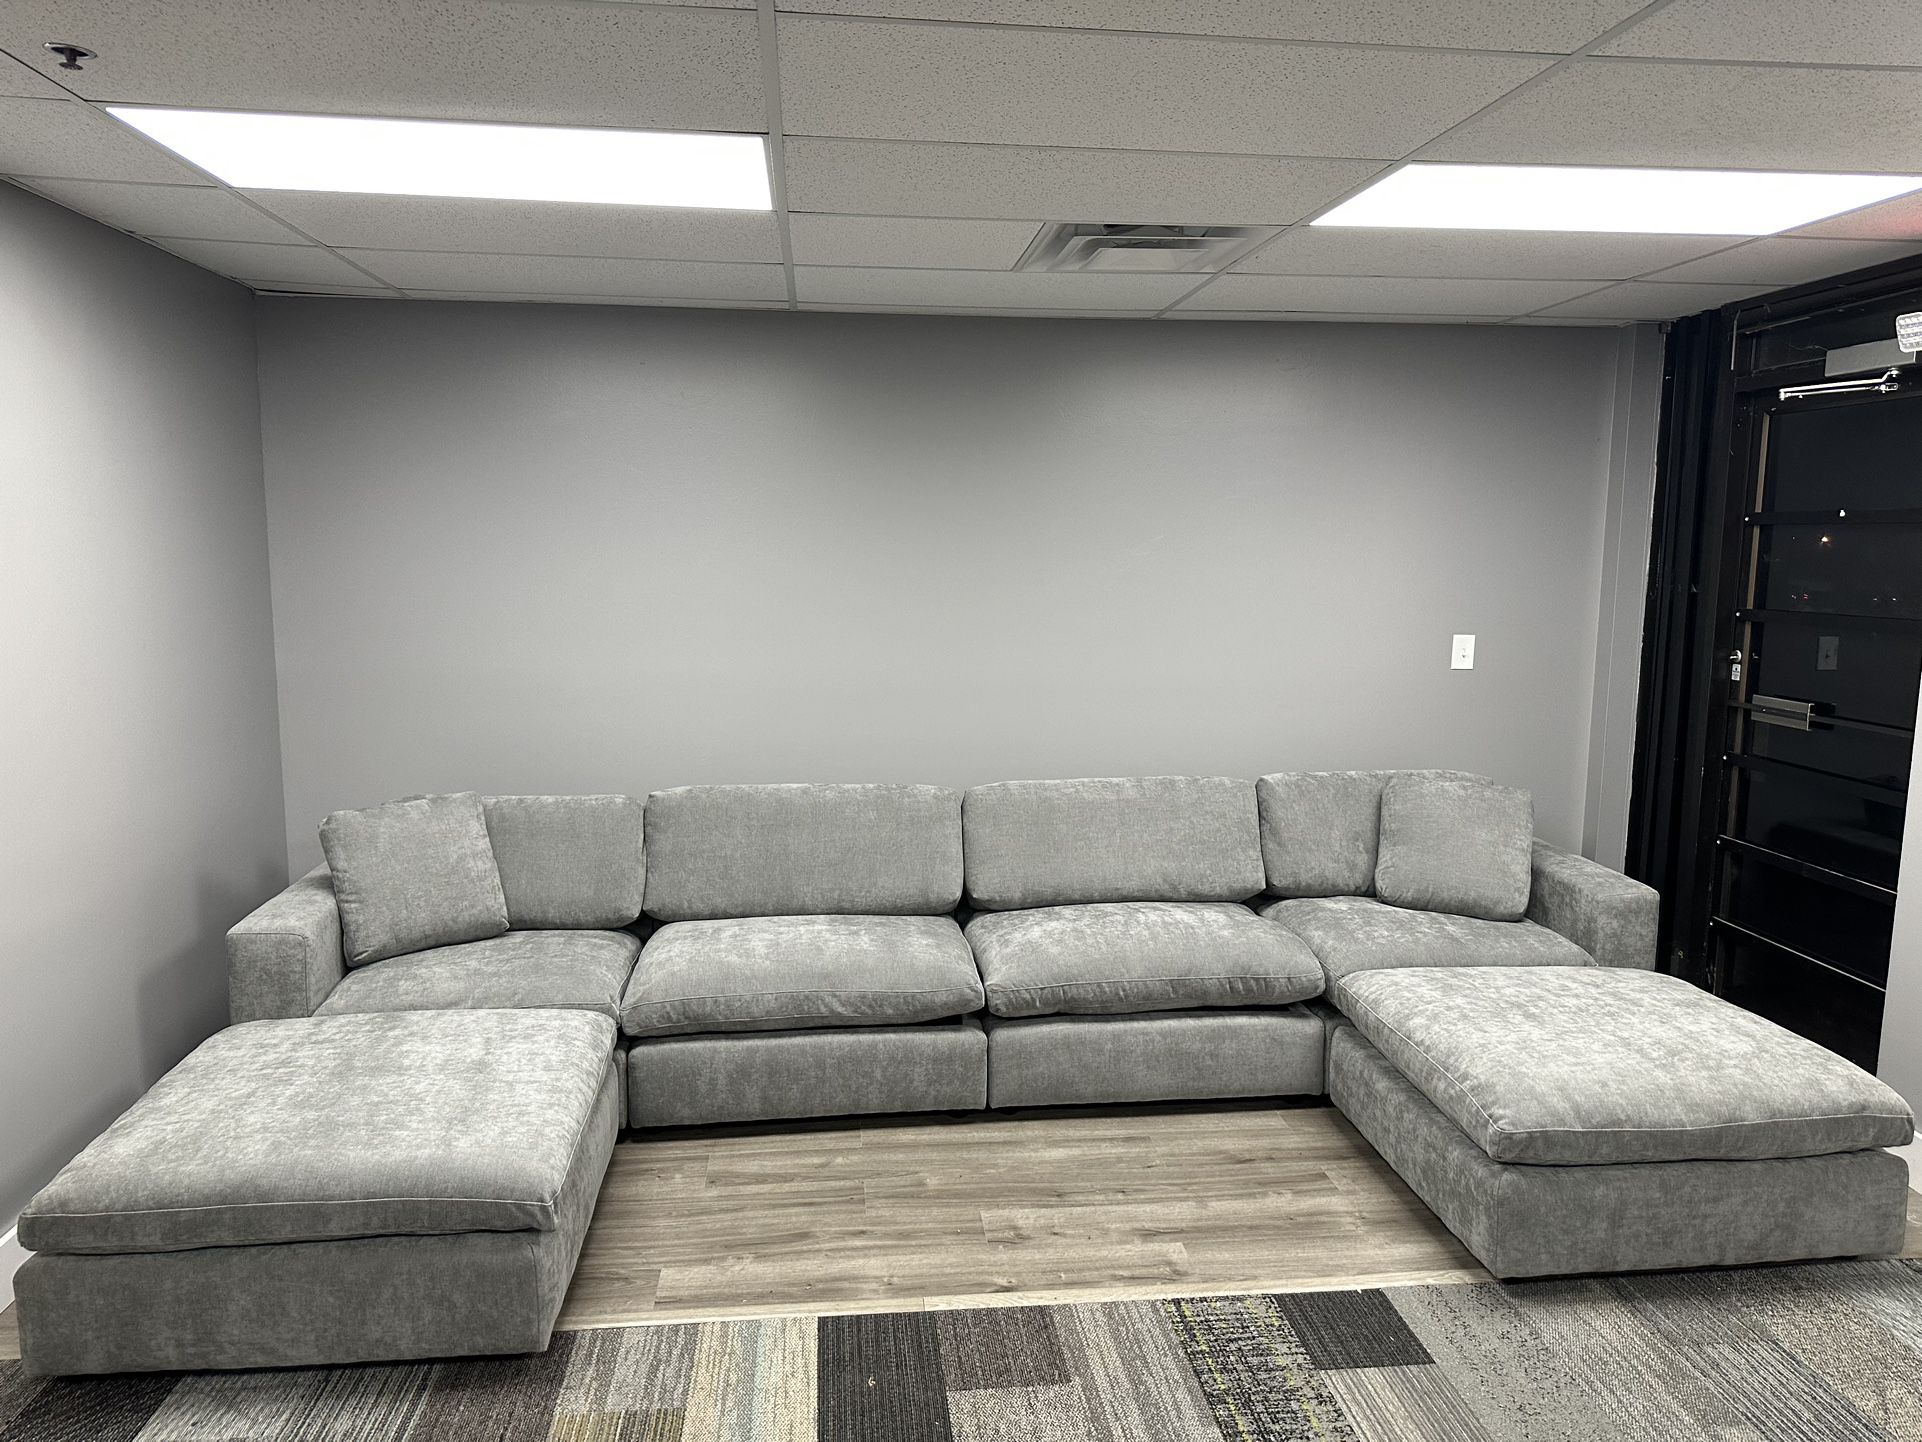 NEW Sectional Couch (FREE DELIVERY🚚)